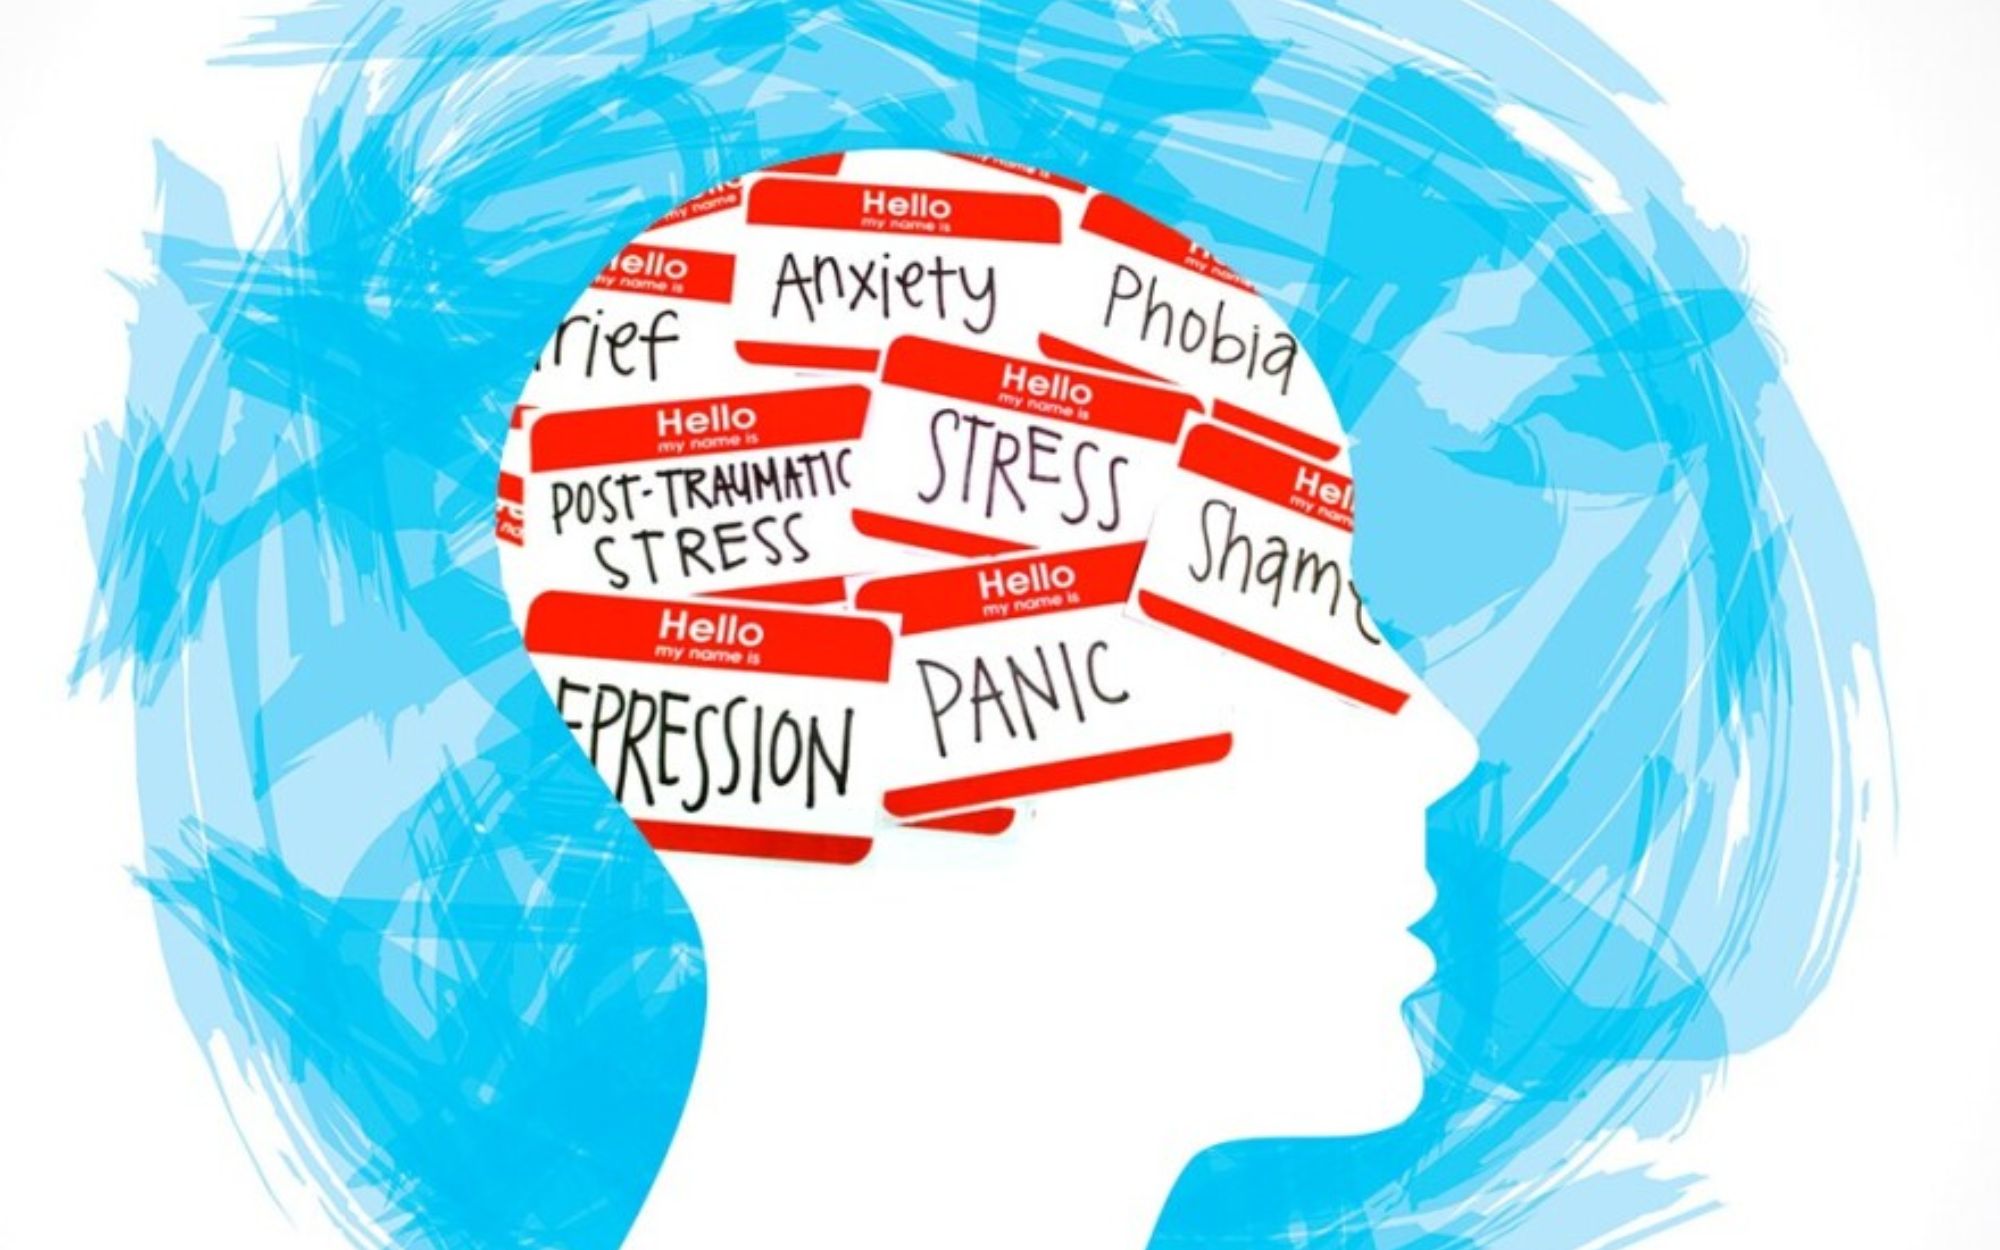 An illustration showing a head tagged with "Stress, panic, post-traumatic stress, shame" and many more